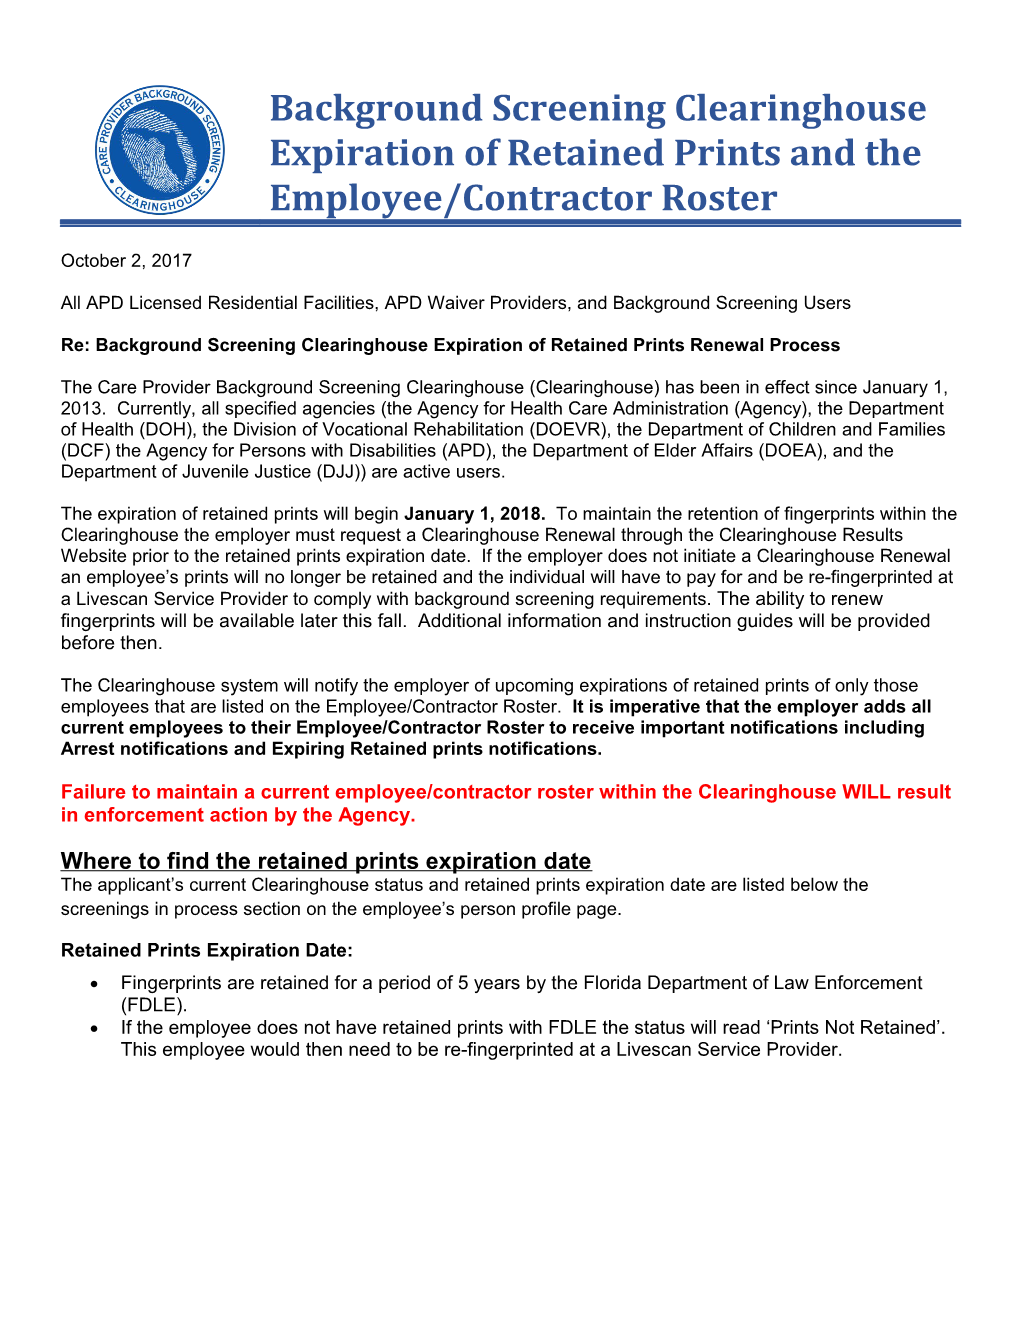 Re: Background Screening Clearinghouse Expiration of Retained Prints Renewal Process